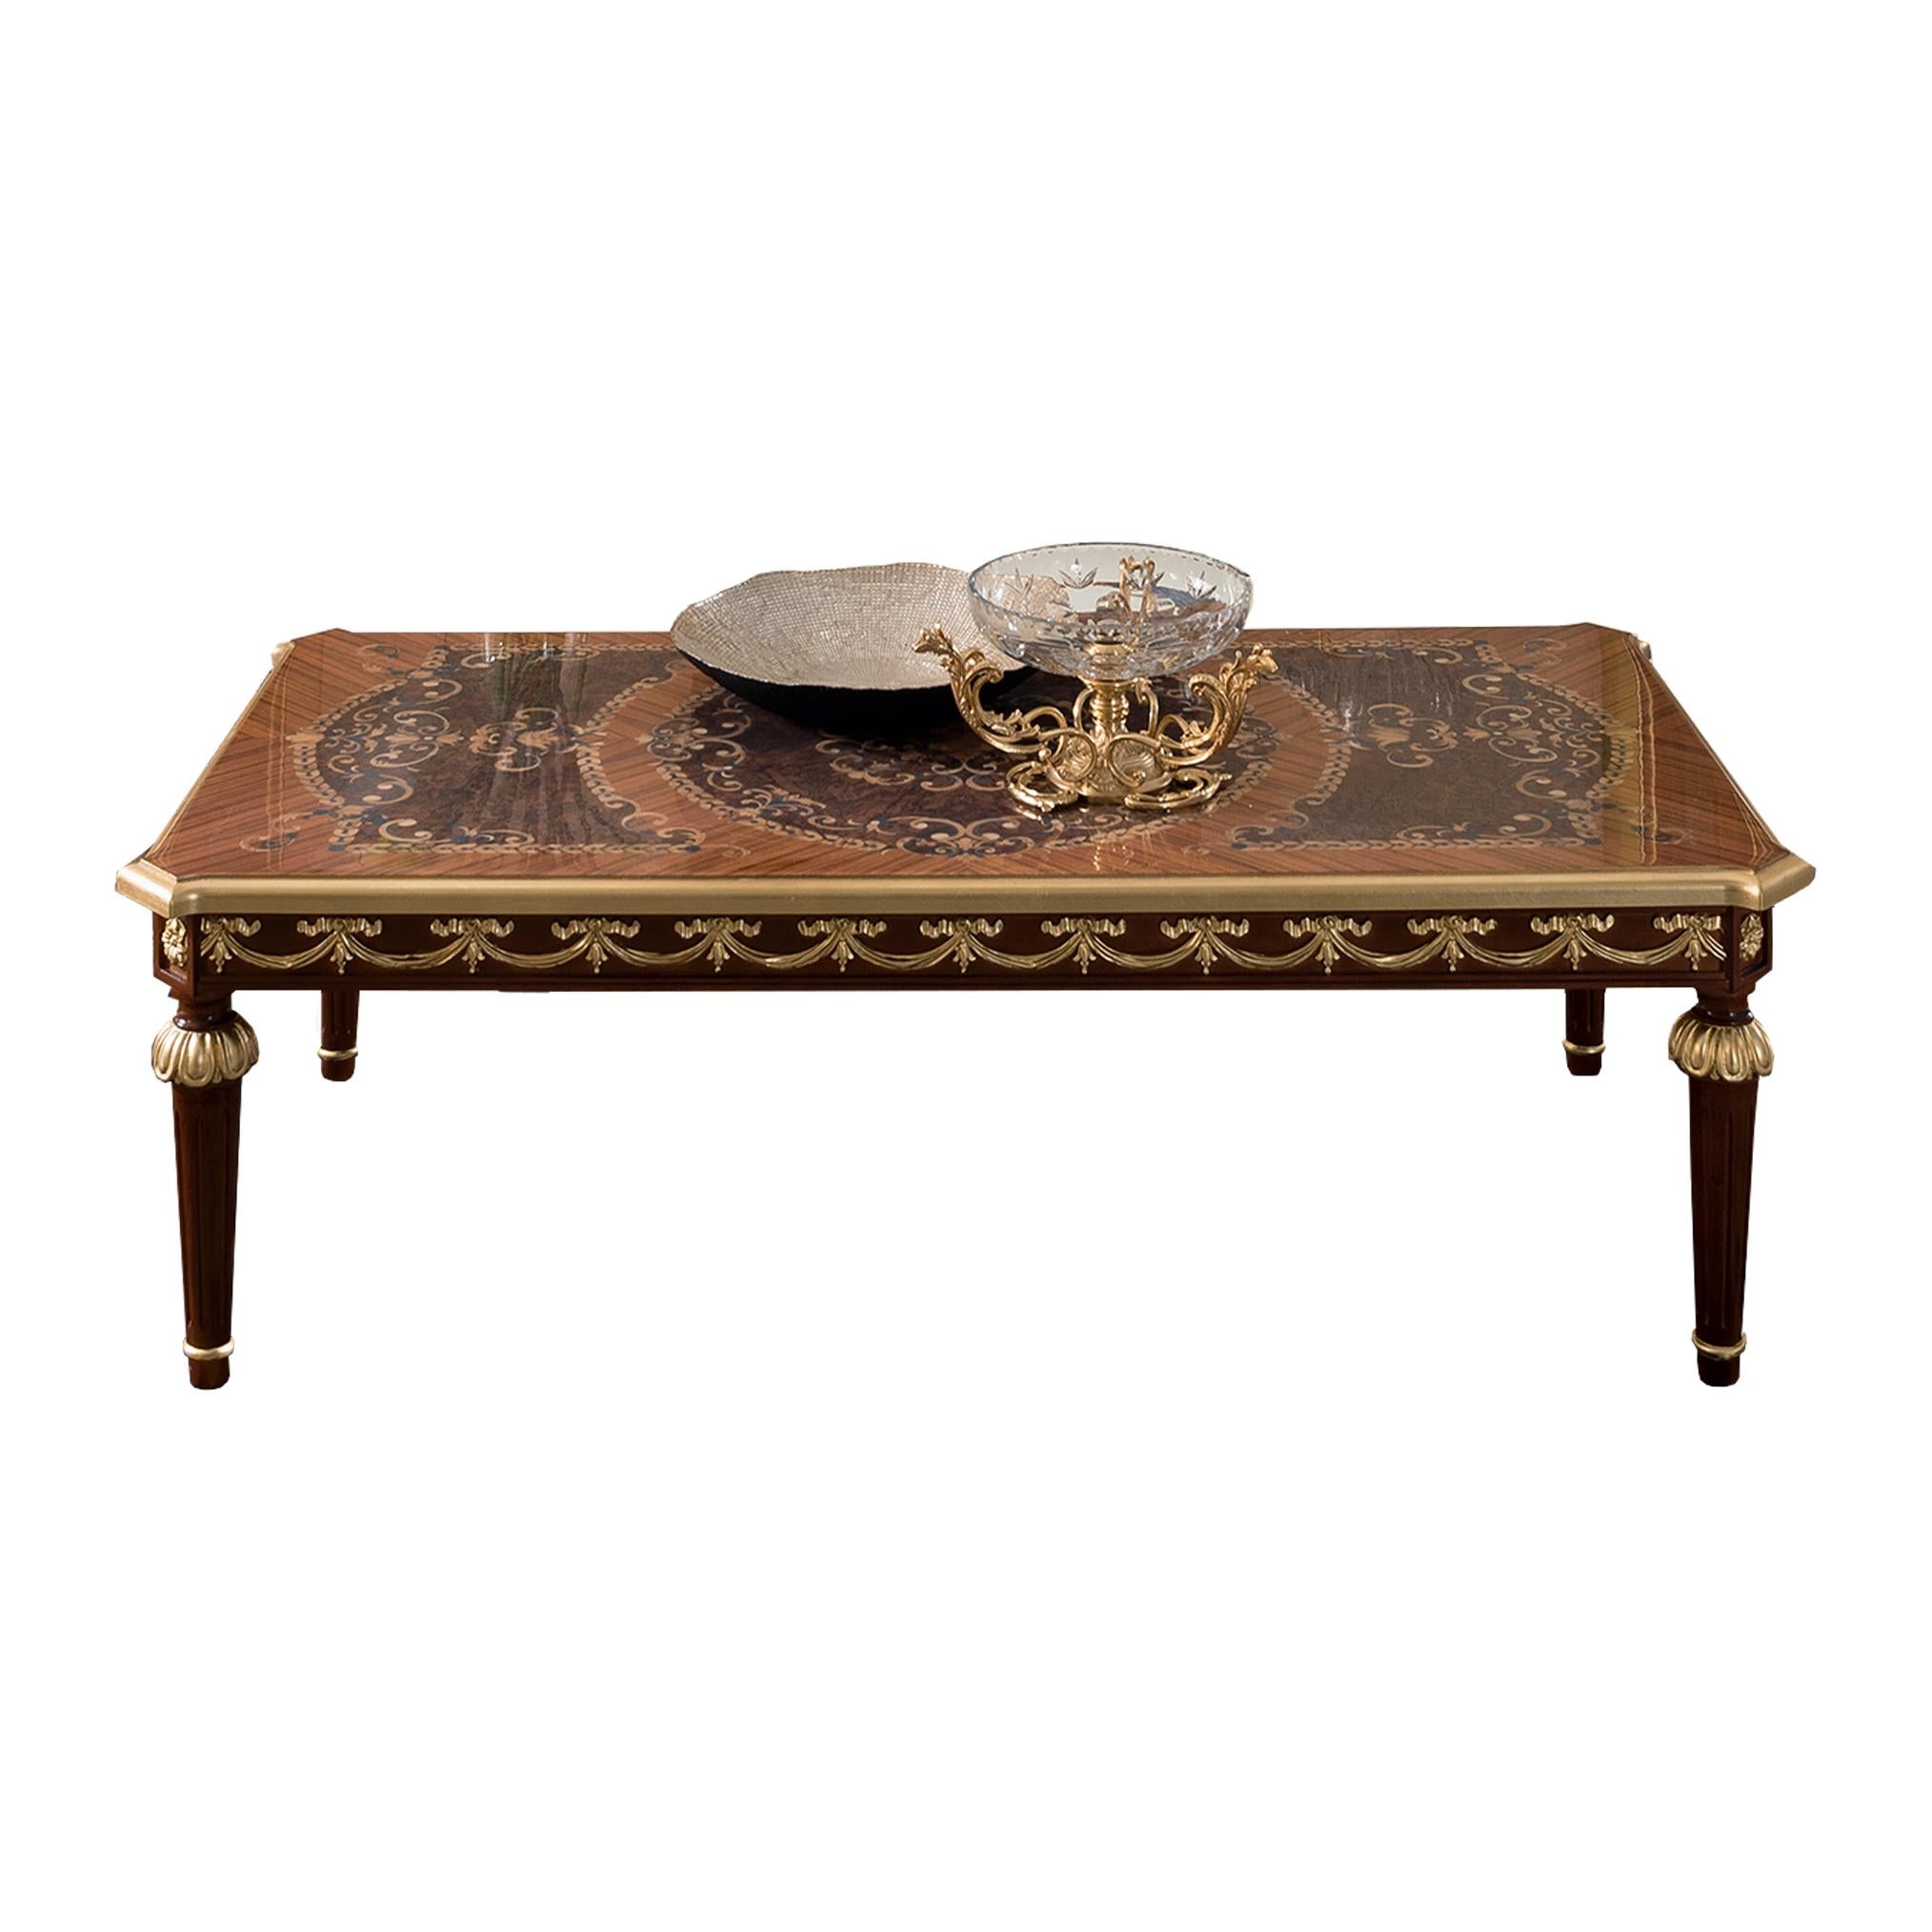 Hand-Painted Rectangular Coffee Table with Inlaid Top + Gold Leaf Finish, Made in Italy For Sale